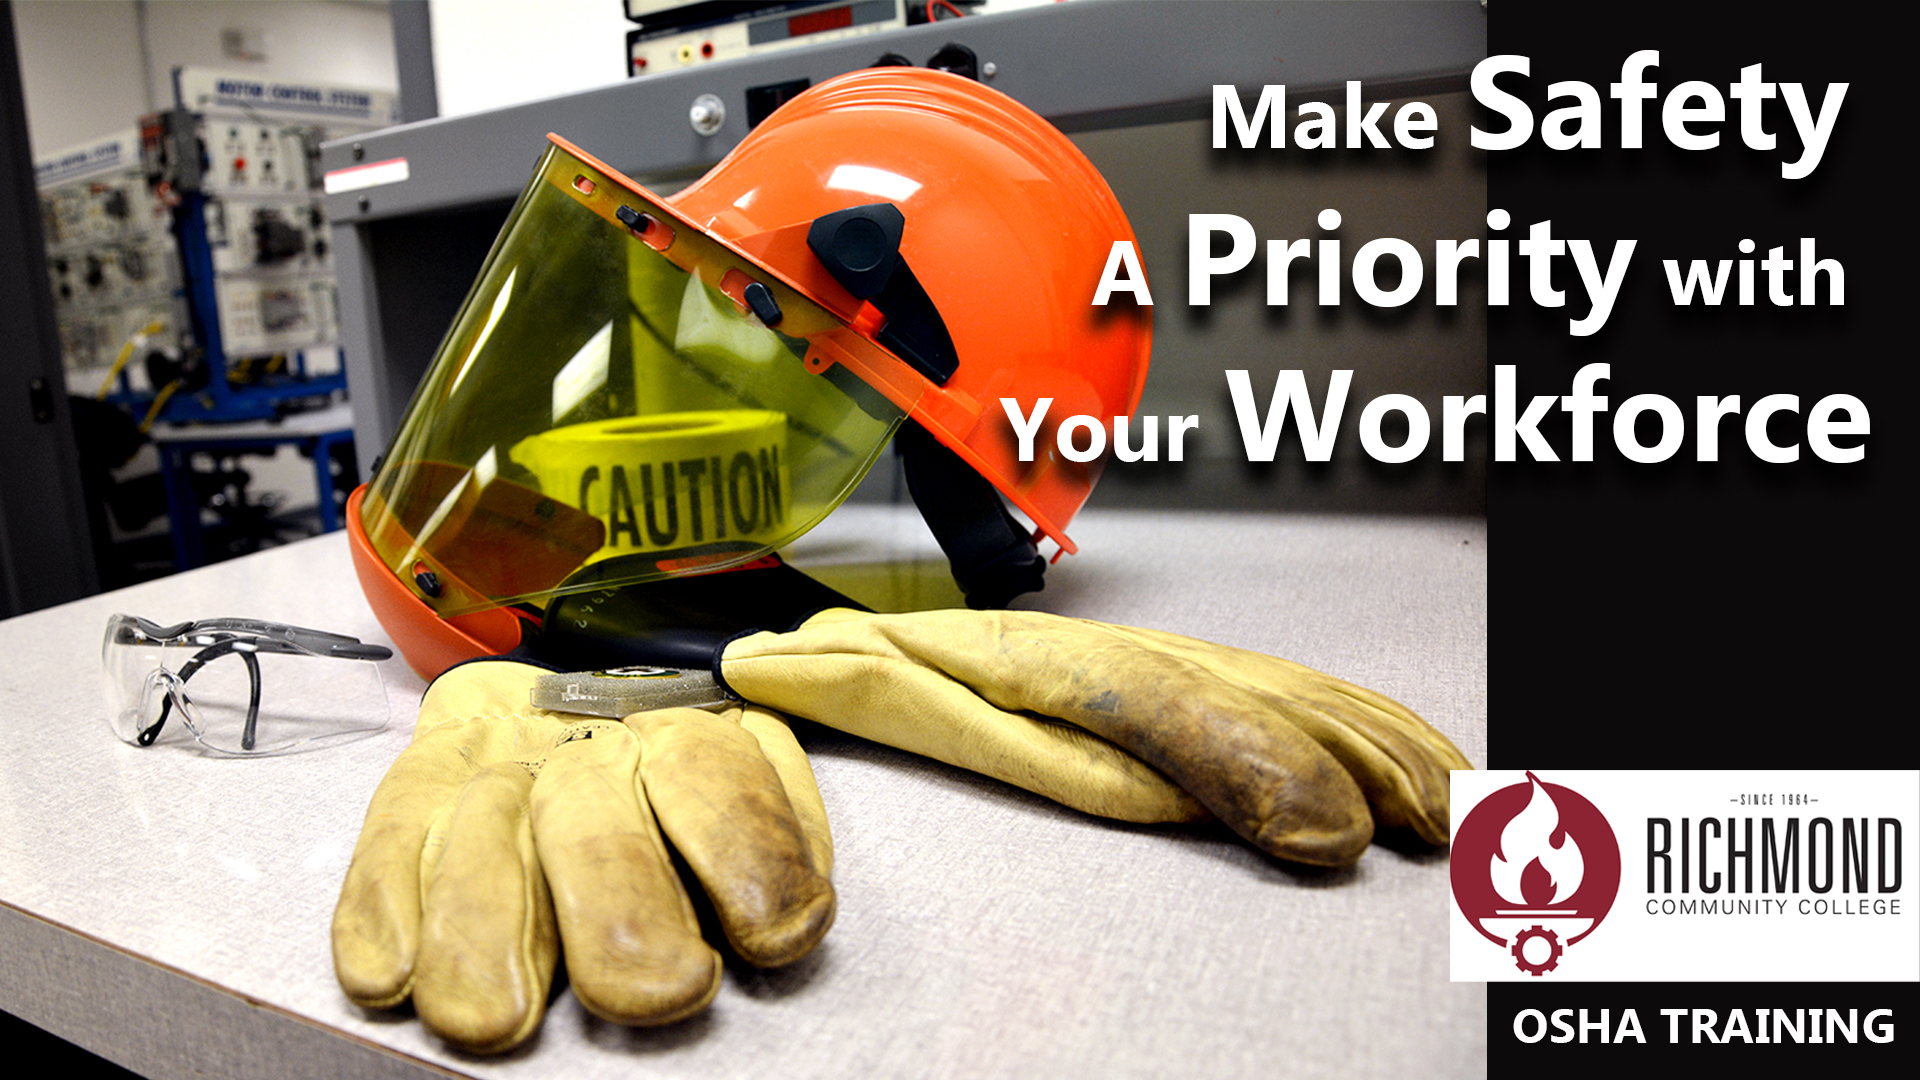 A photo of safety equipment with the words "Make Safety a Priority with Your Workforce." And the RCC Logo with the words "OSHA Training."